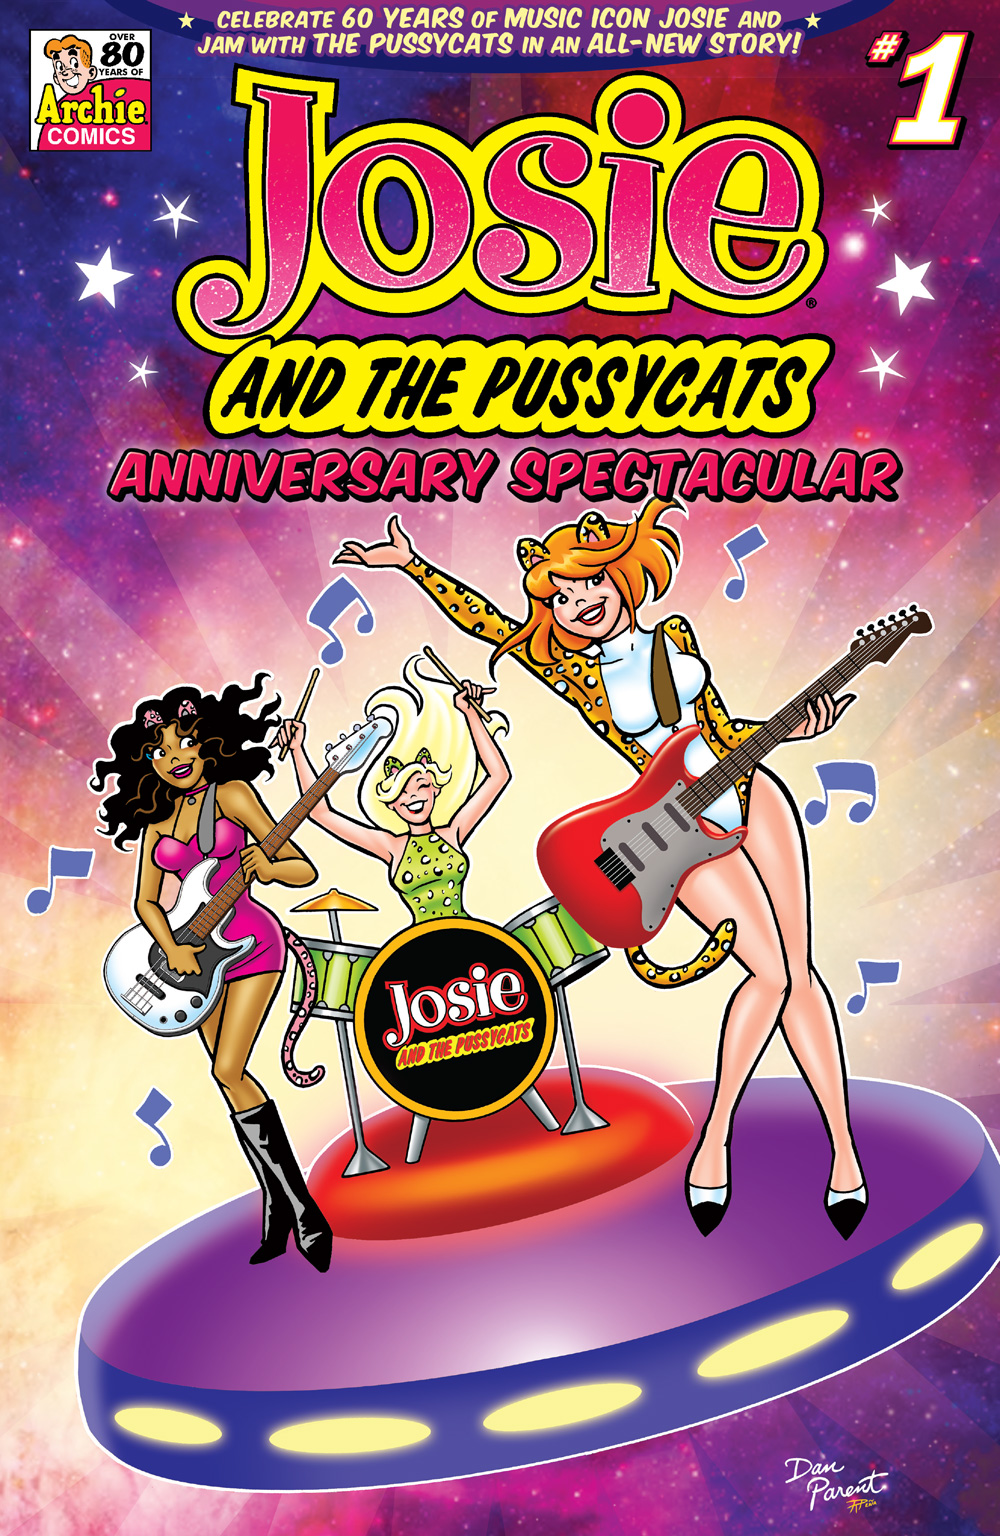 Cover of JOSIE AND THE PUSSYCATS ANNIVERSARY SPECTACULAR. The band plays their instruments on top of a flying saucer against an abstract background.